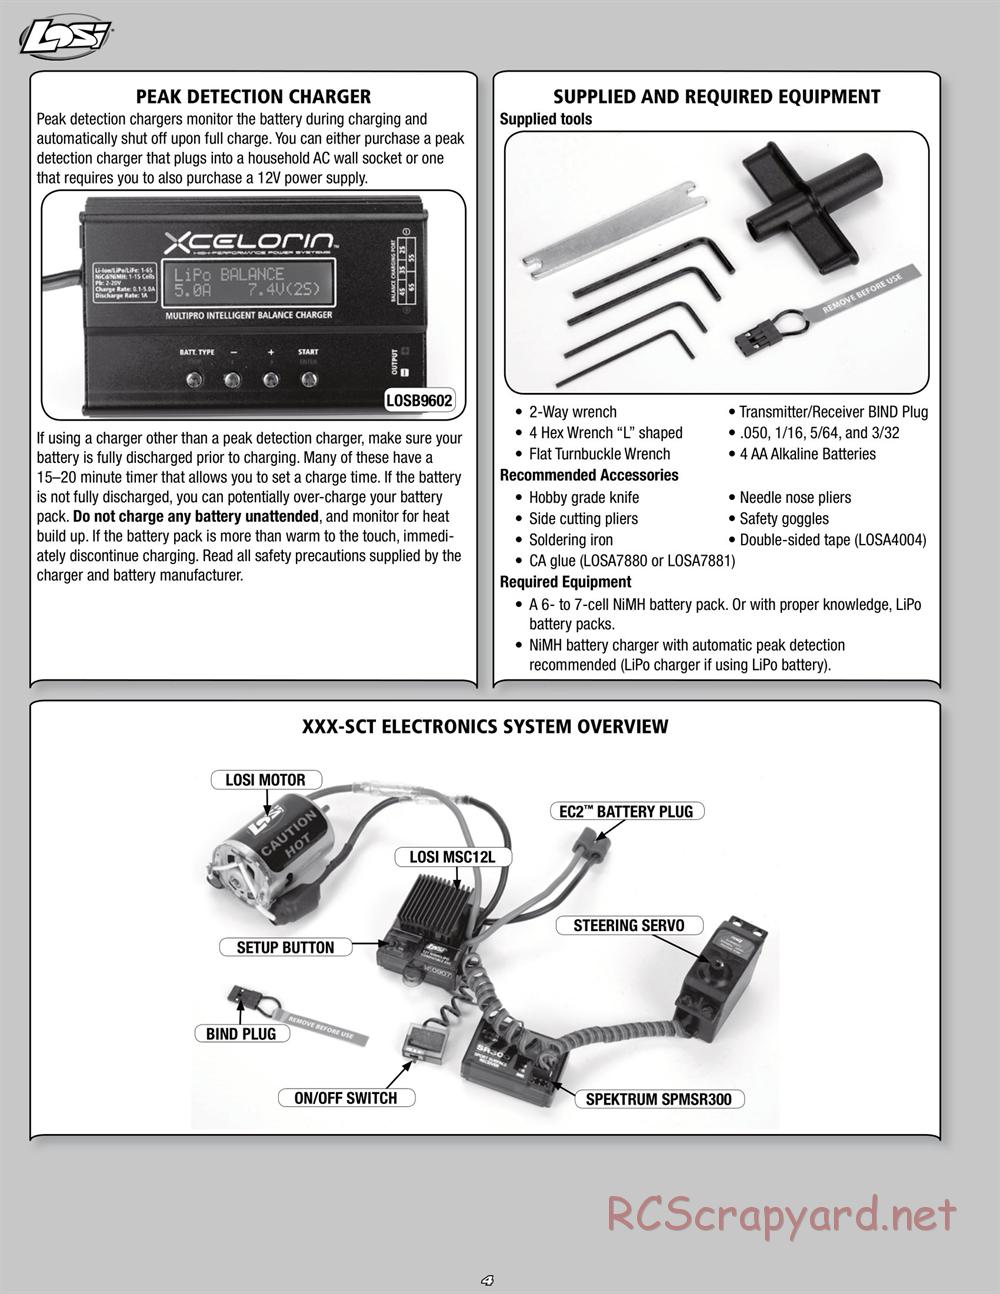 Team Losi - XXX SCT - Manual - Page 4